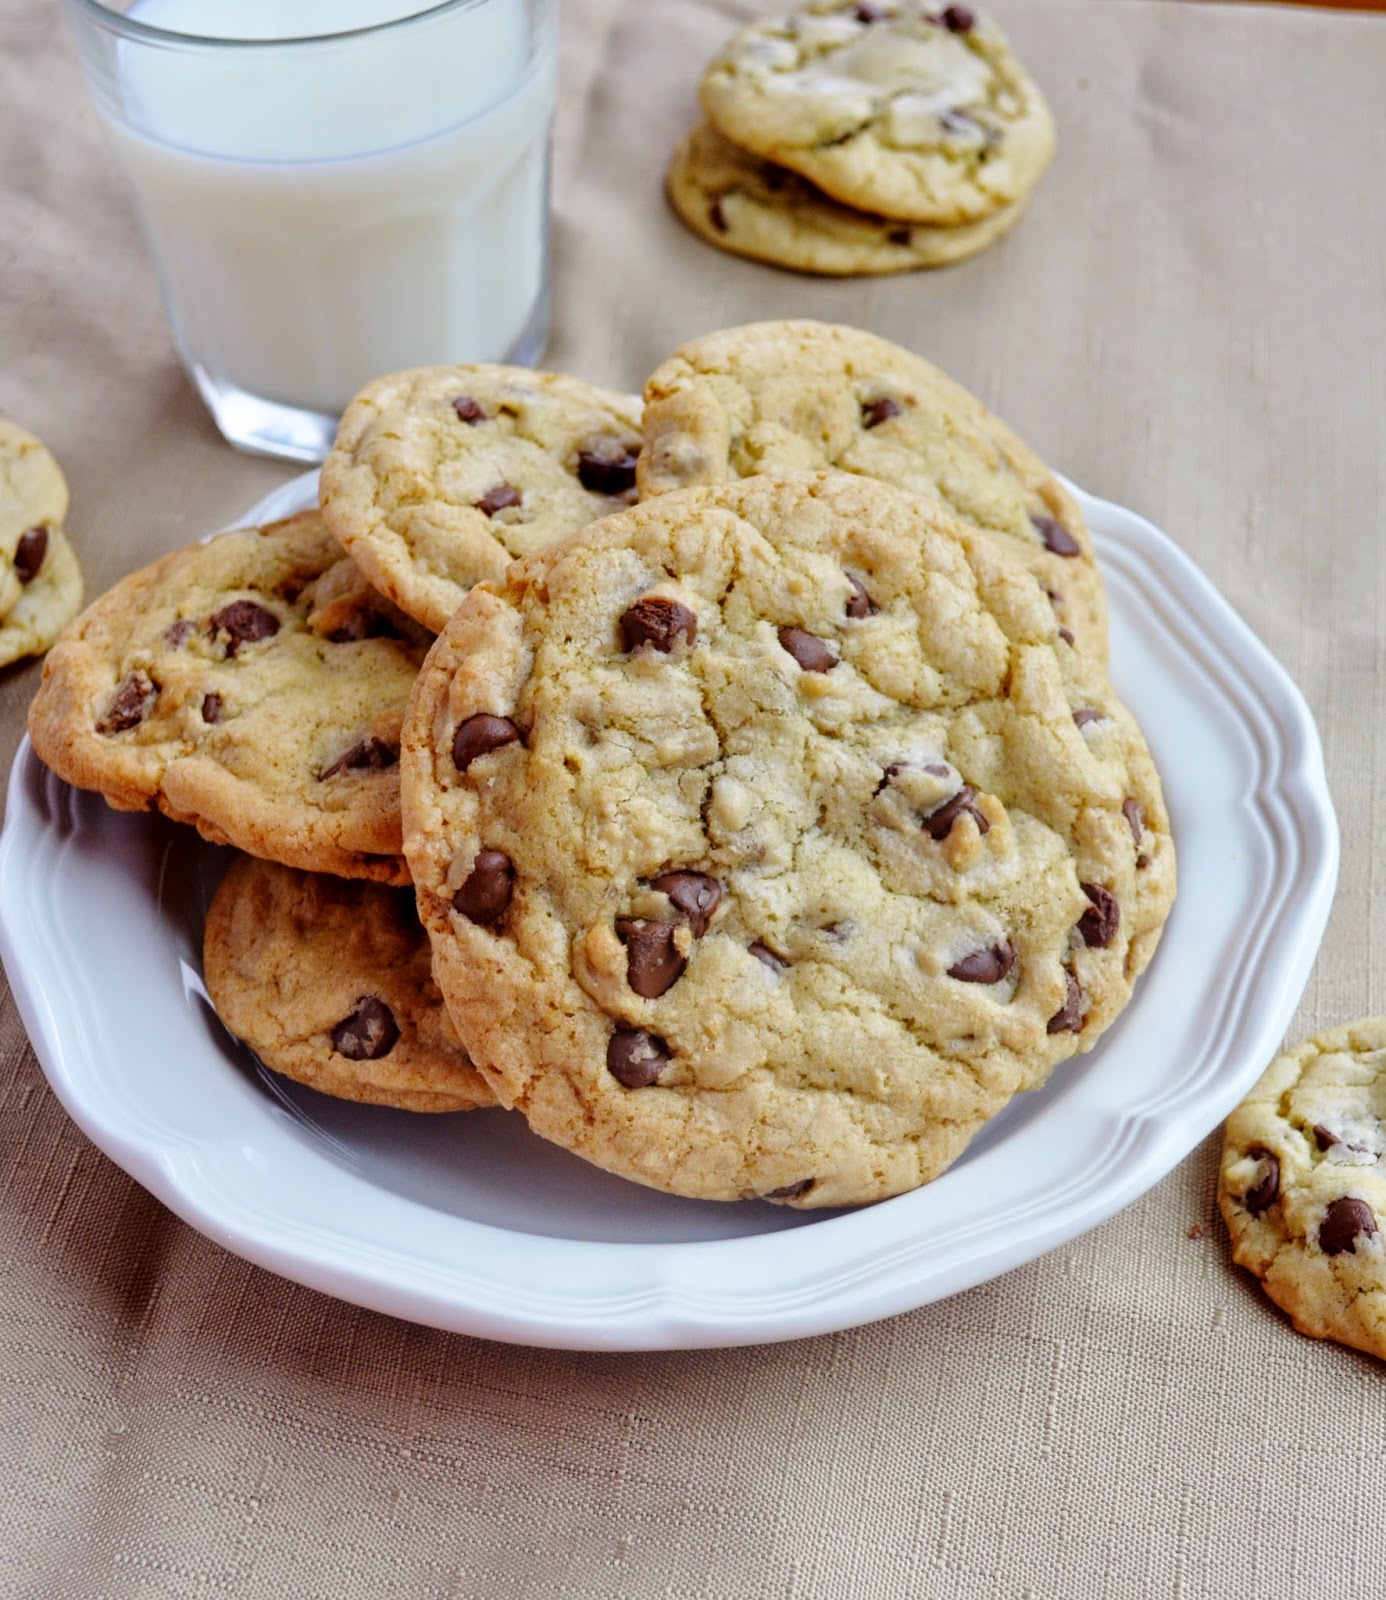 Our Beautiful Mess: The BEST Chewy Chocolate Chip Cookies